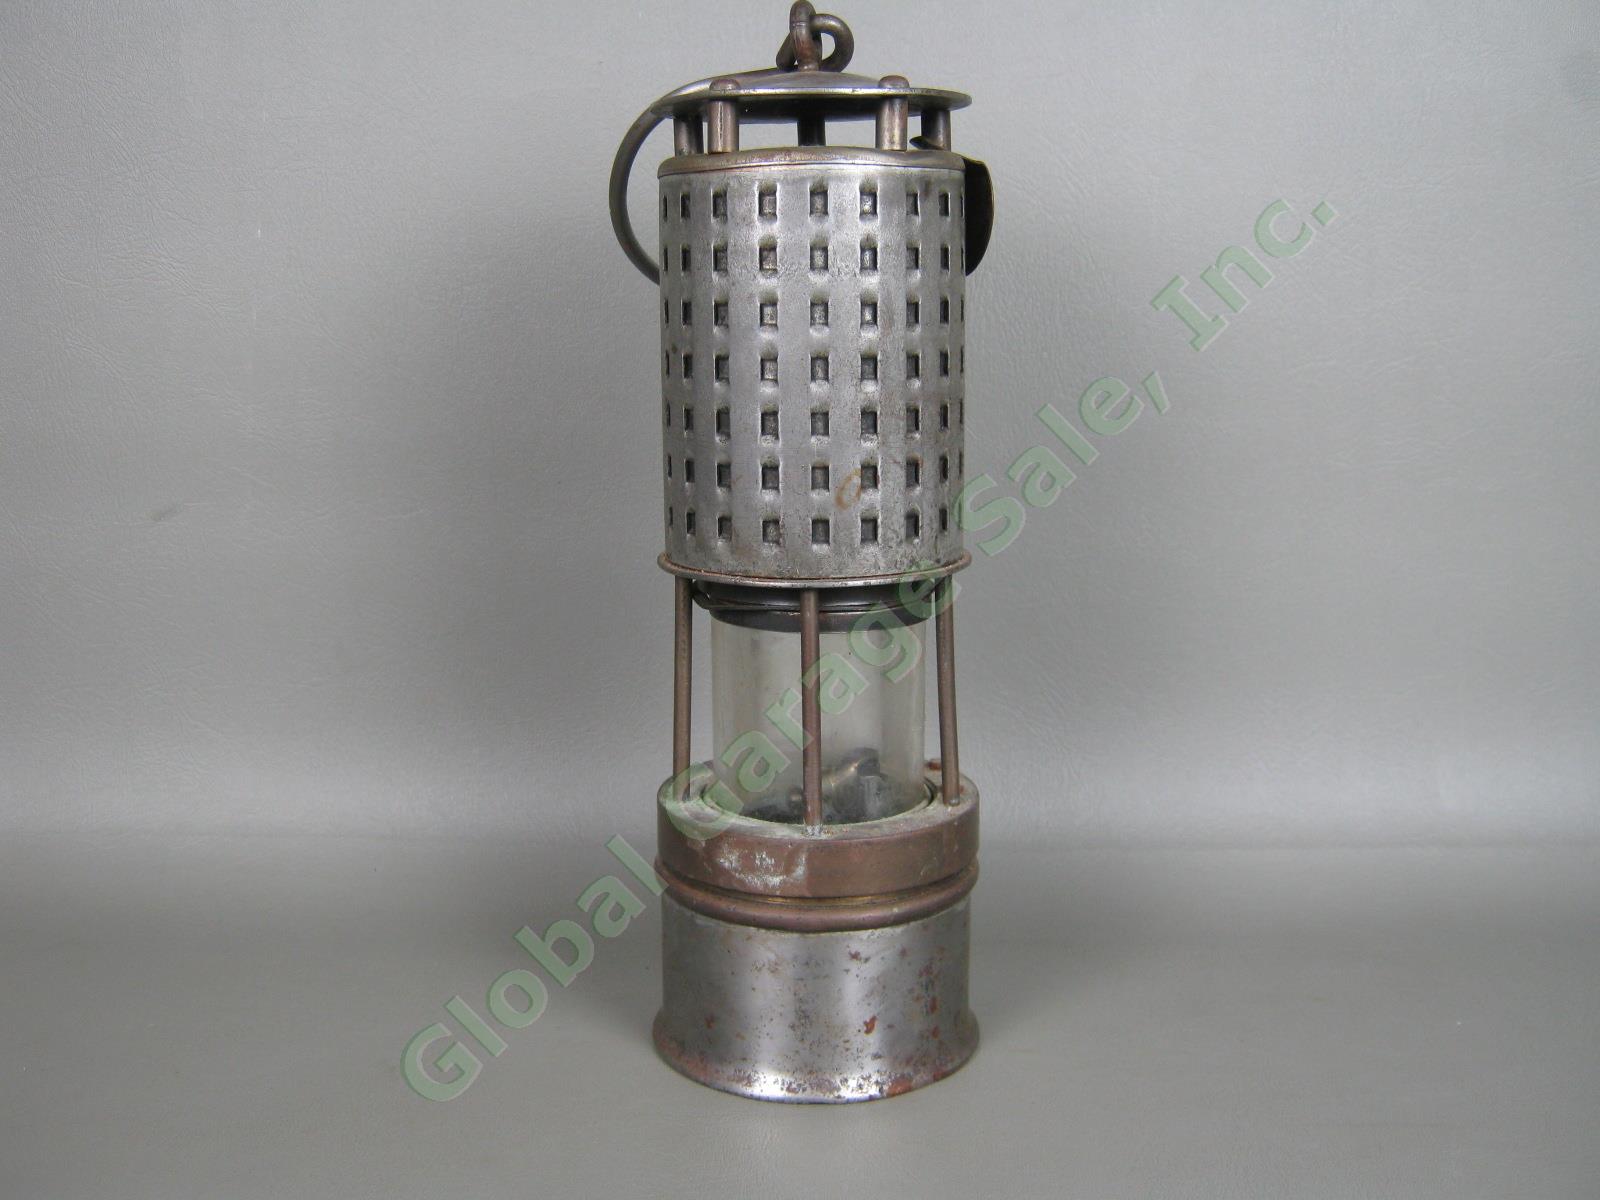 Vtg Permissible 201 Miners Safety Lamp Glen Alden Coal Co 29 No 19 Colly Tag NR! 4